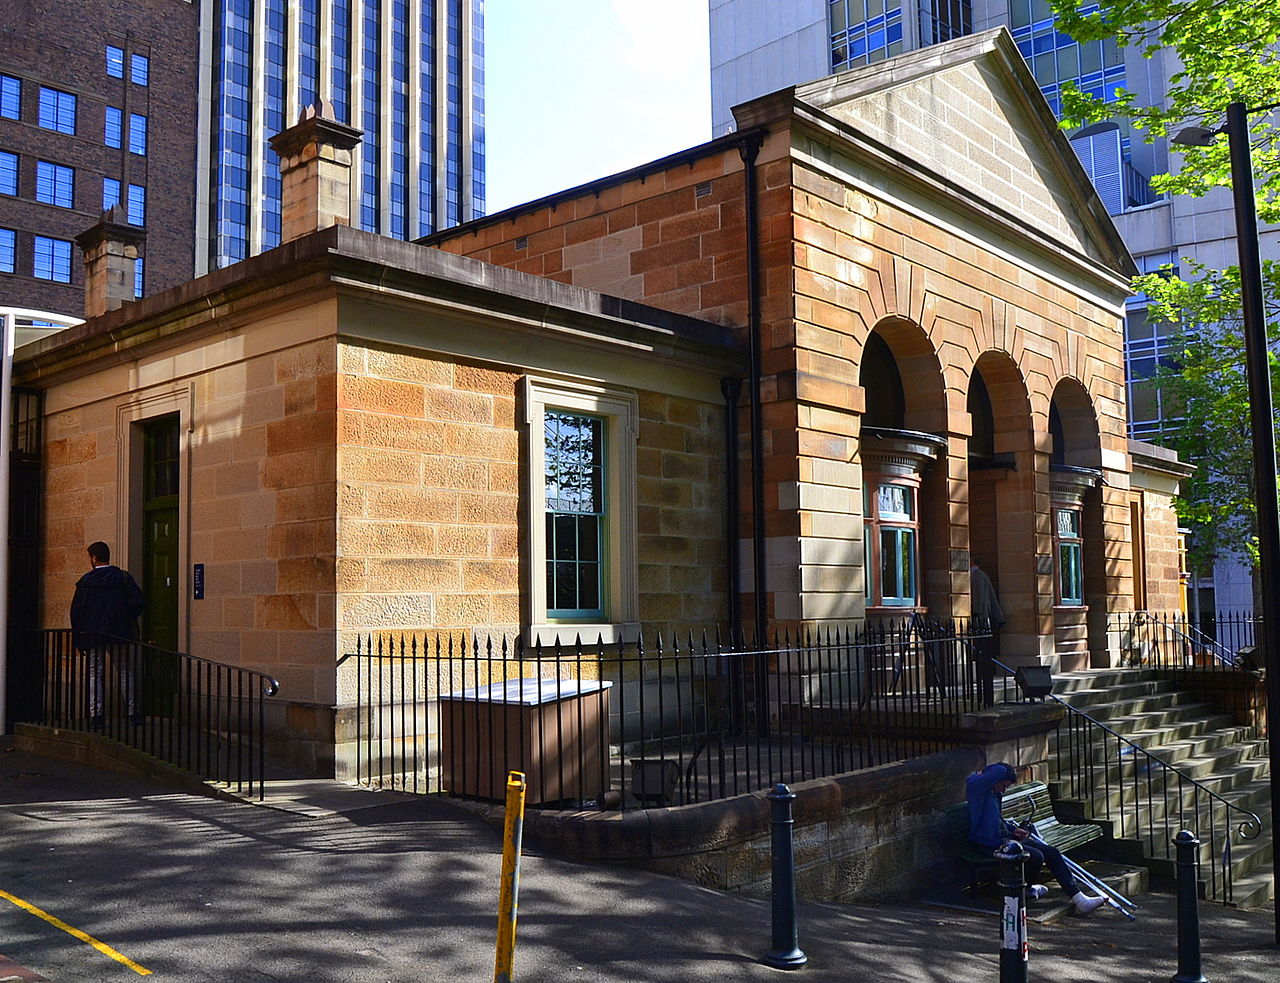 Two interesting and unusual museums in Australia